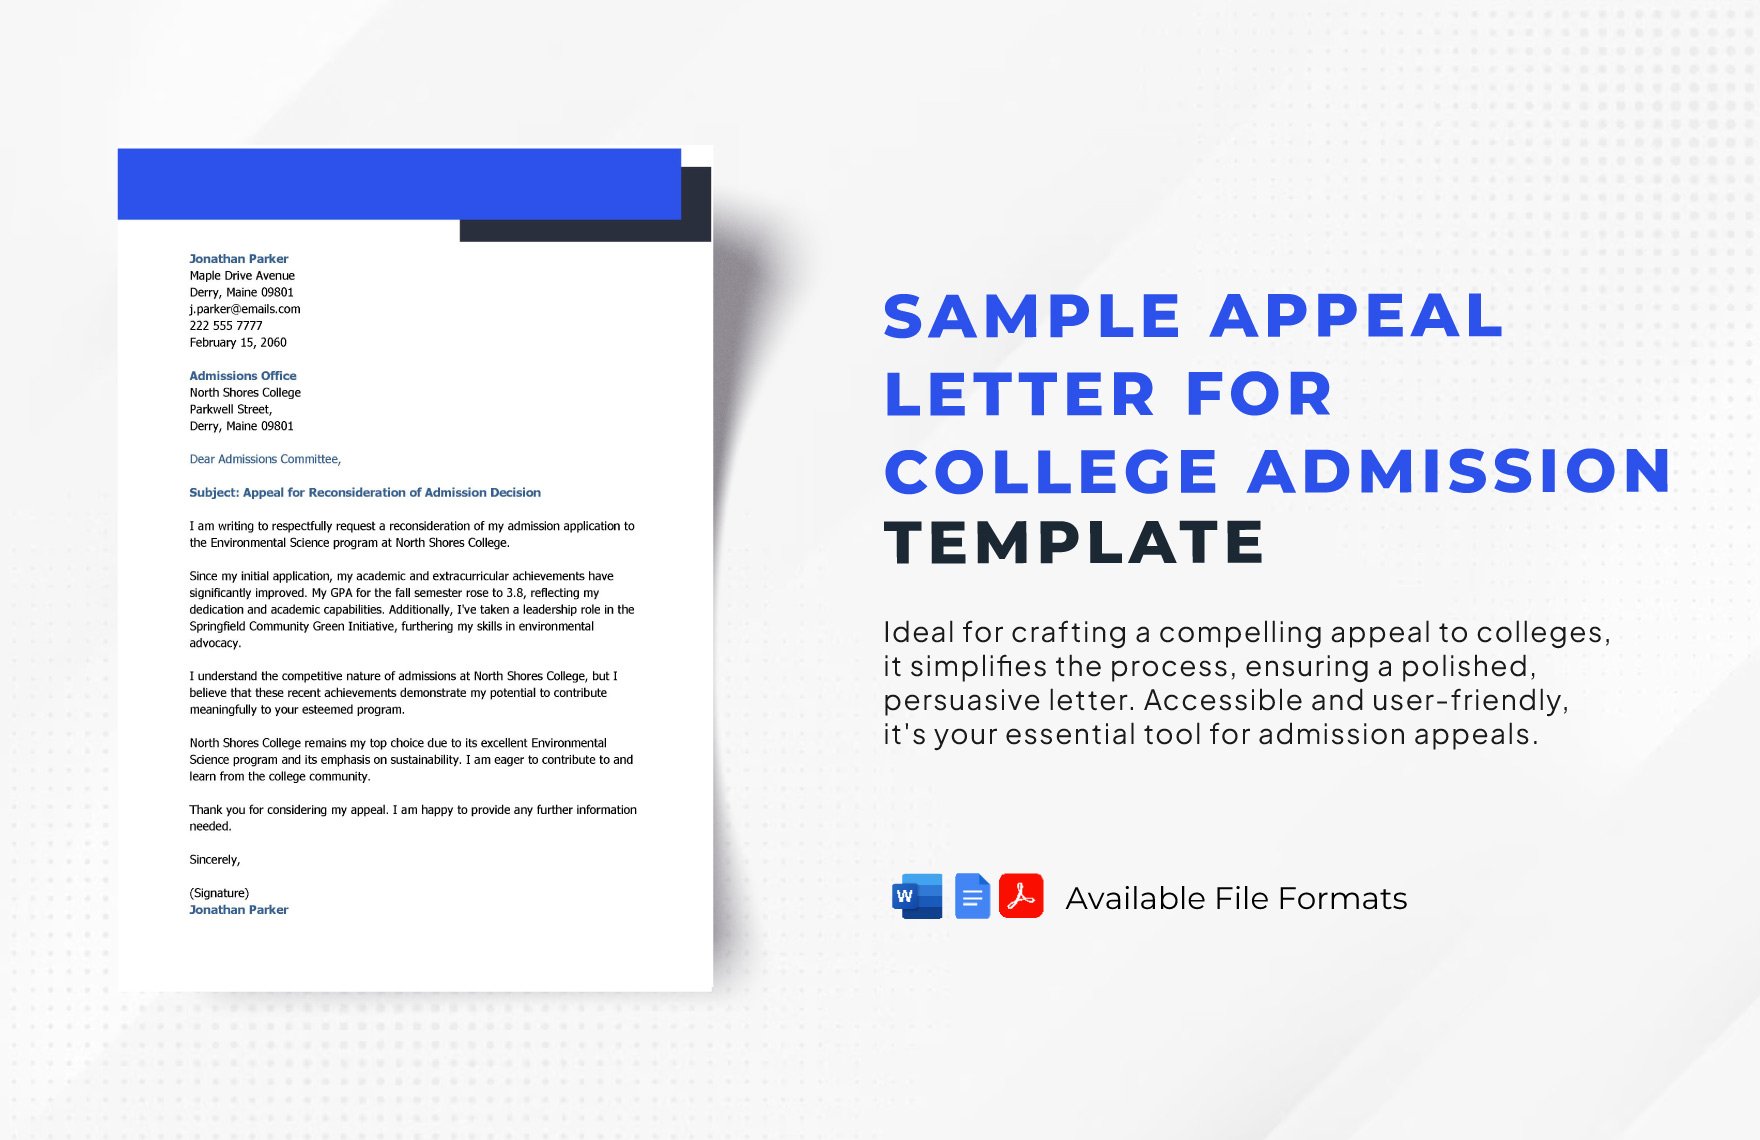 Sample Appeal Letter for College Admission Template